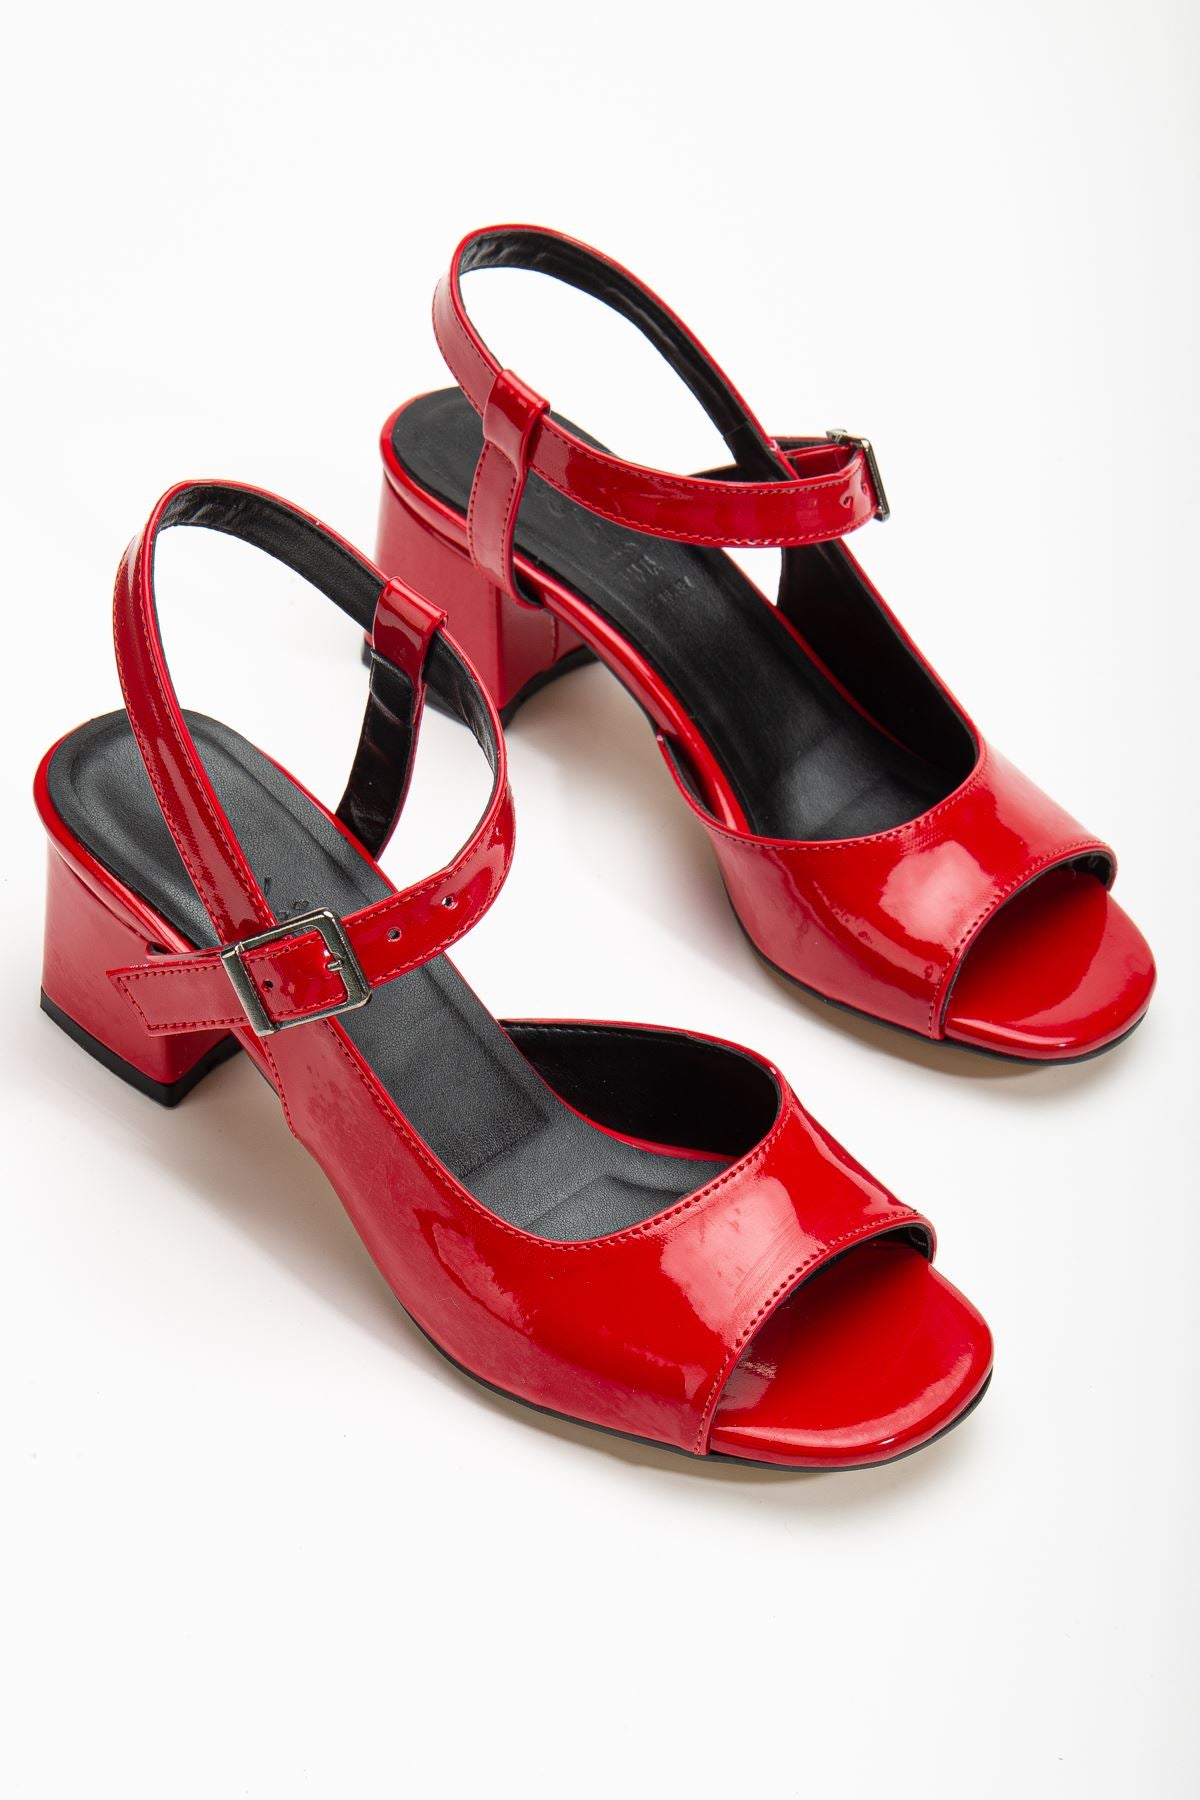 Keri Heeled Red Patent Leather Blunt Toe Women's Shoes - STREETMODE ™